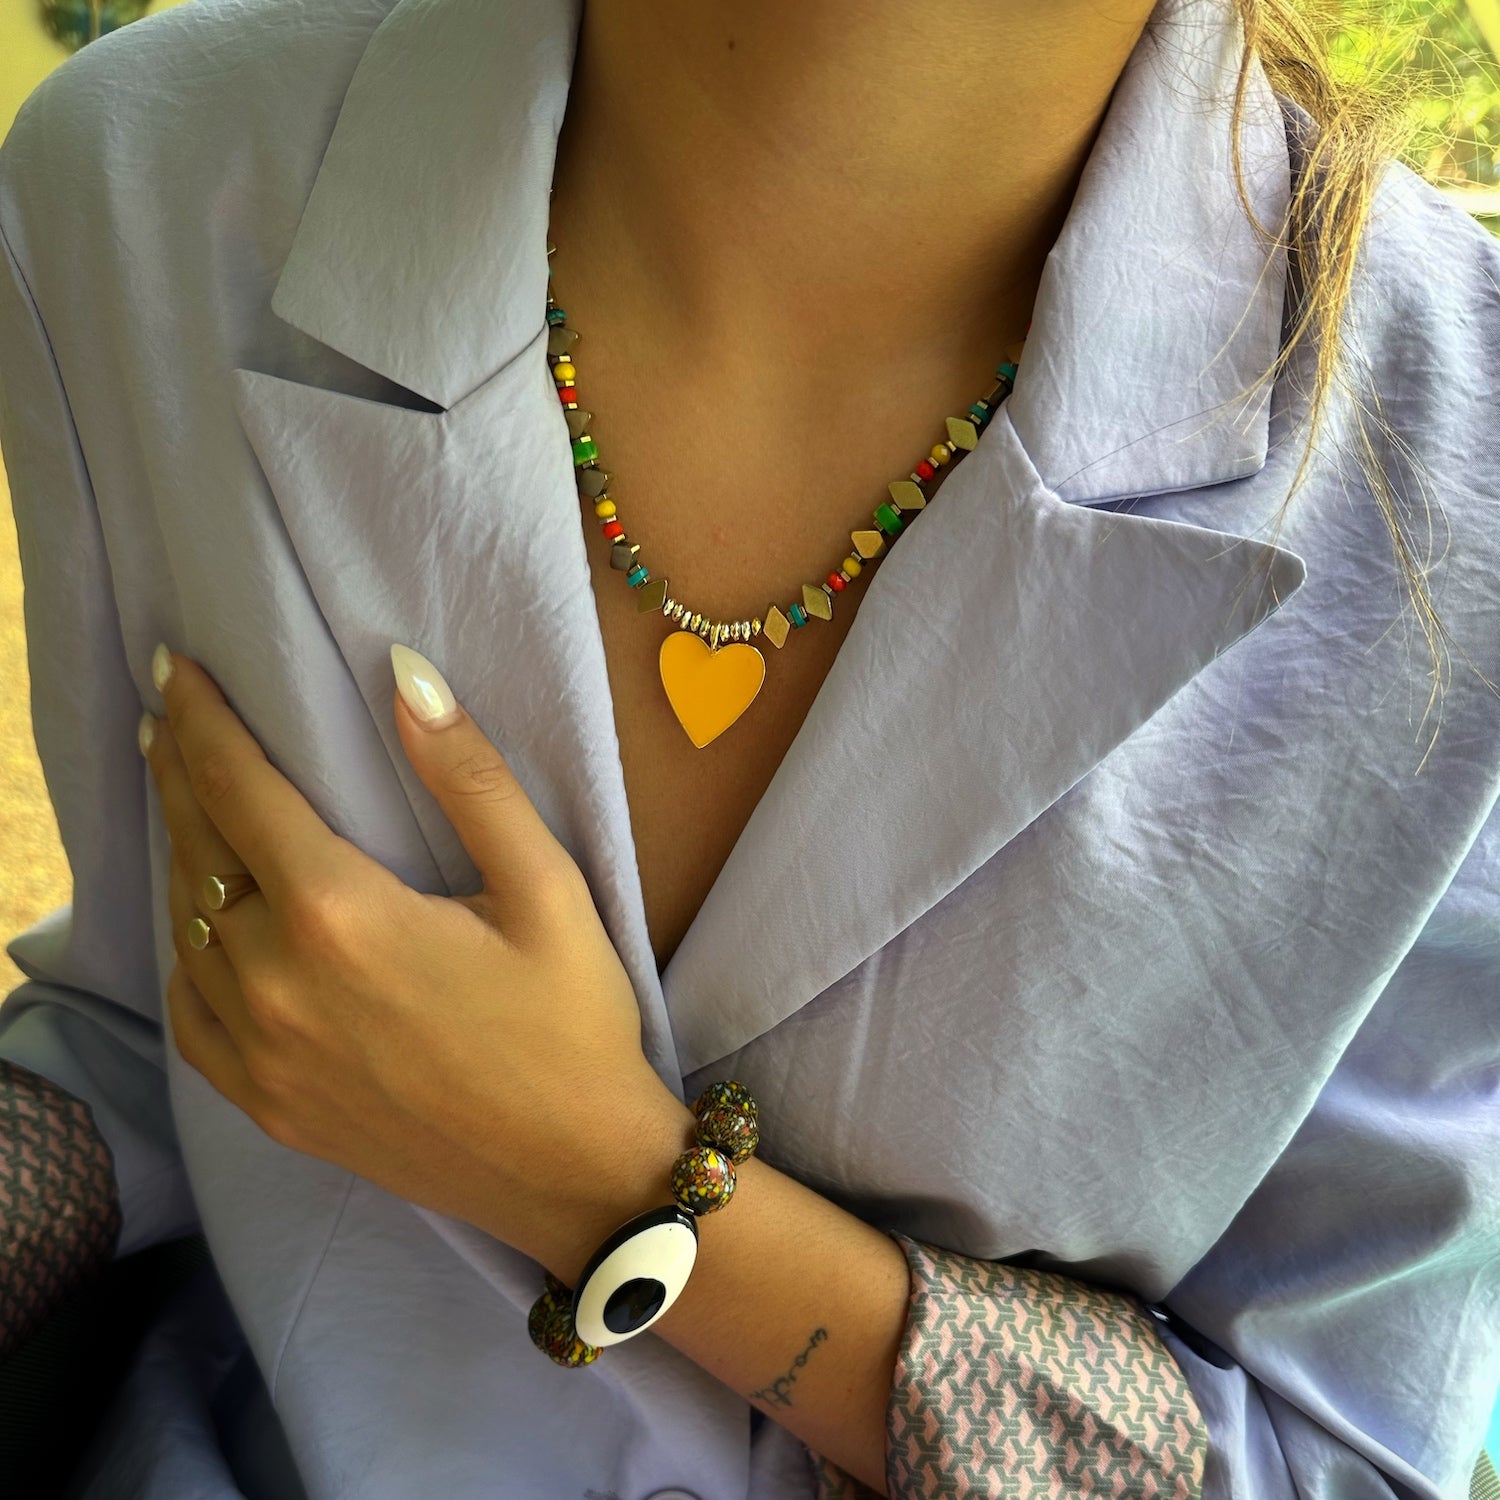 A model wearing the Joyful Heartbeat Necklace, exuding joy and confidence with its vibrant colors and heart pendant.